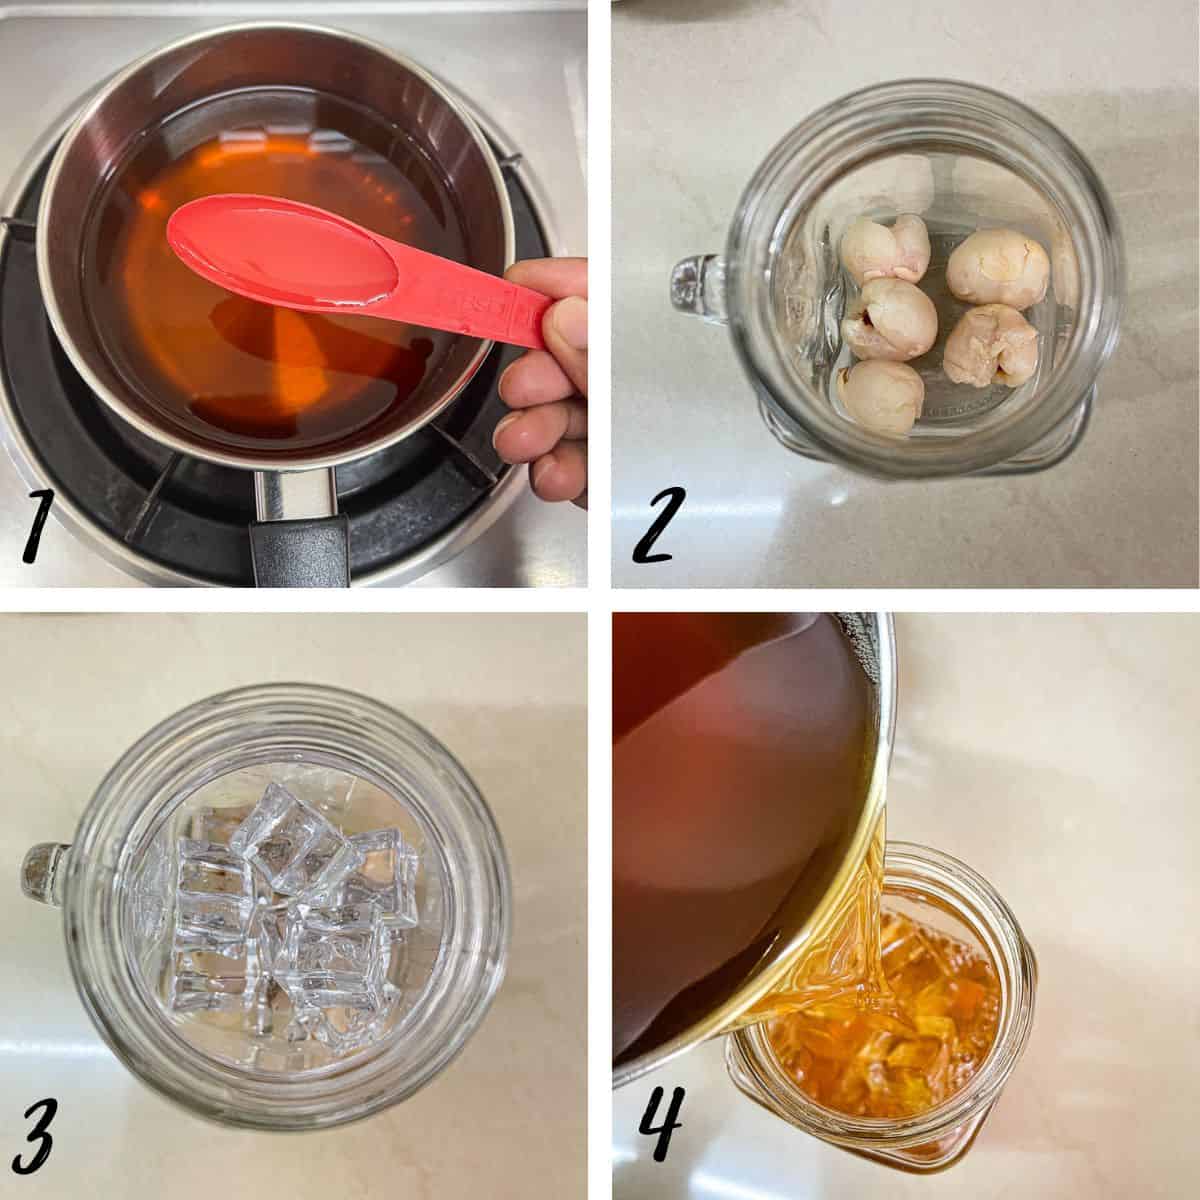 A poster of 4 images showing how to add lychee syrup into black tea and how to assemble lychee tea.